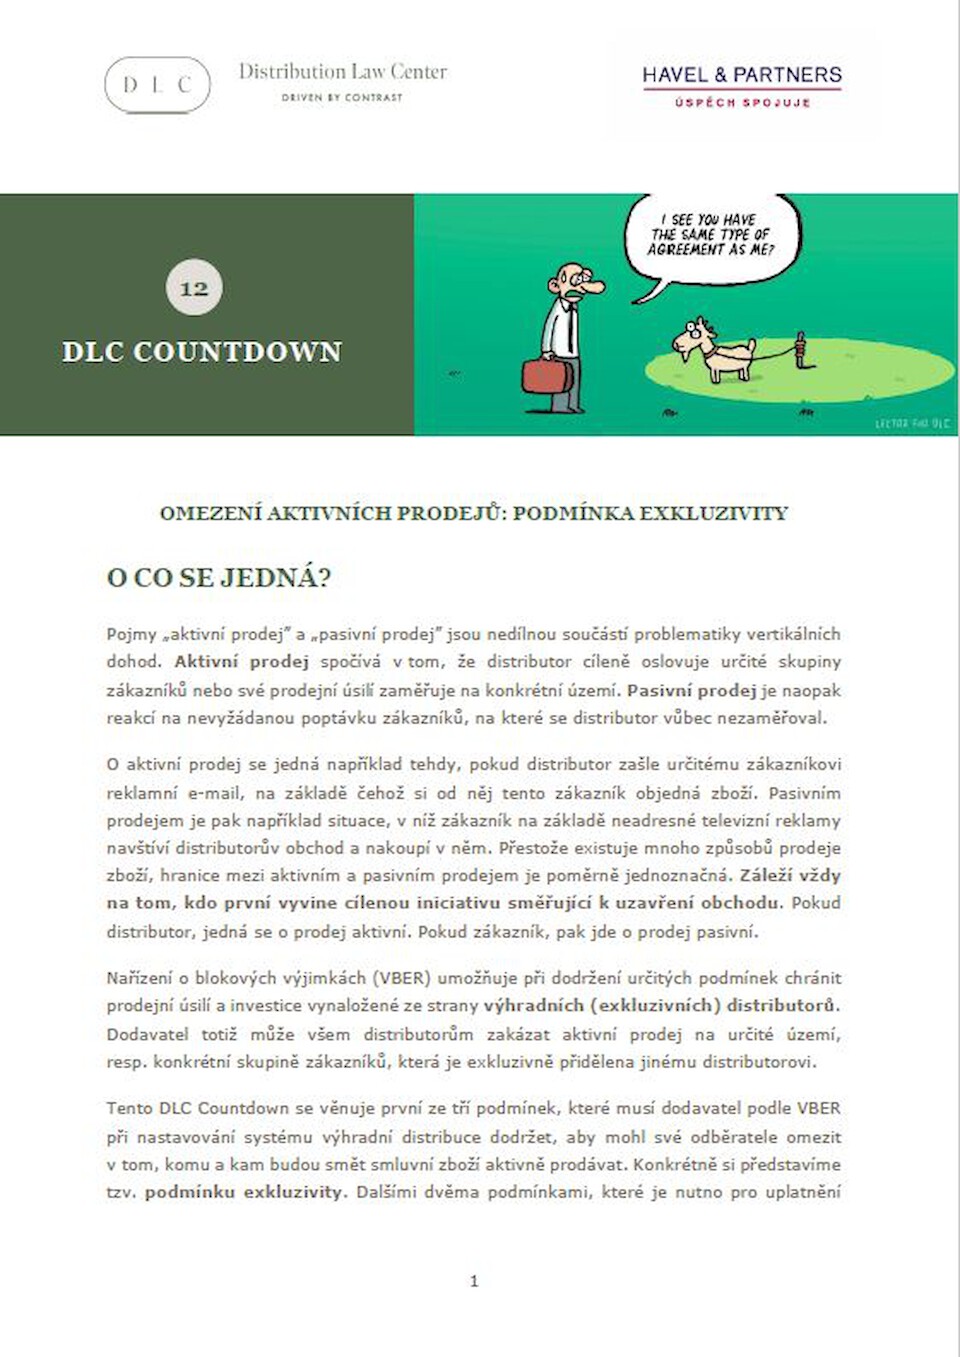 Distribution Law Center Countdown XII - Active sales restrictions (Exclusivity condition)